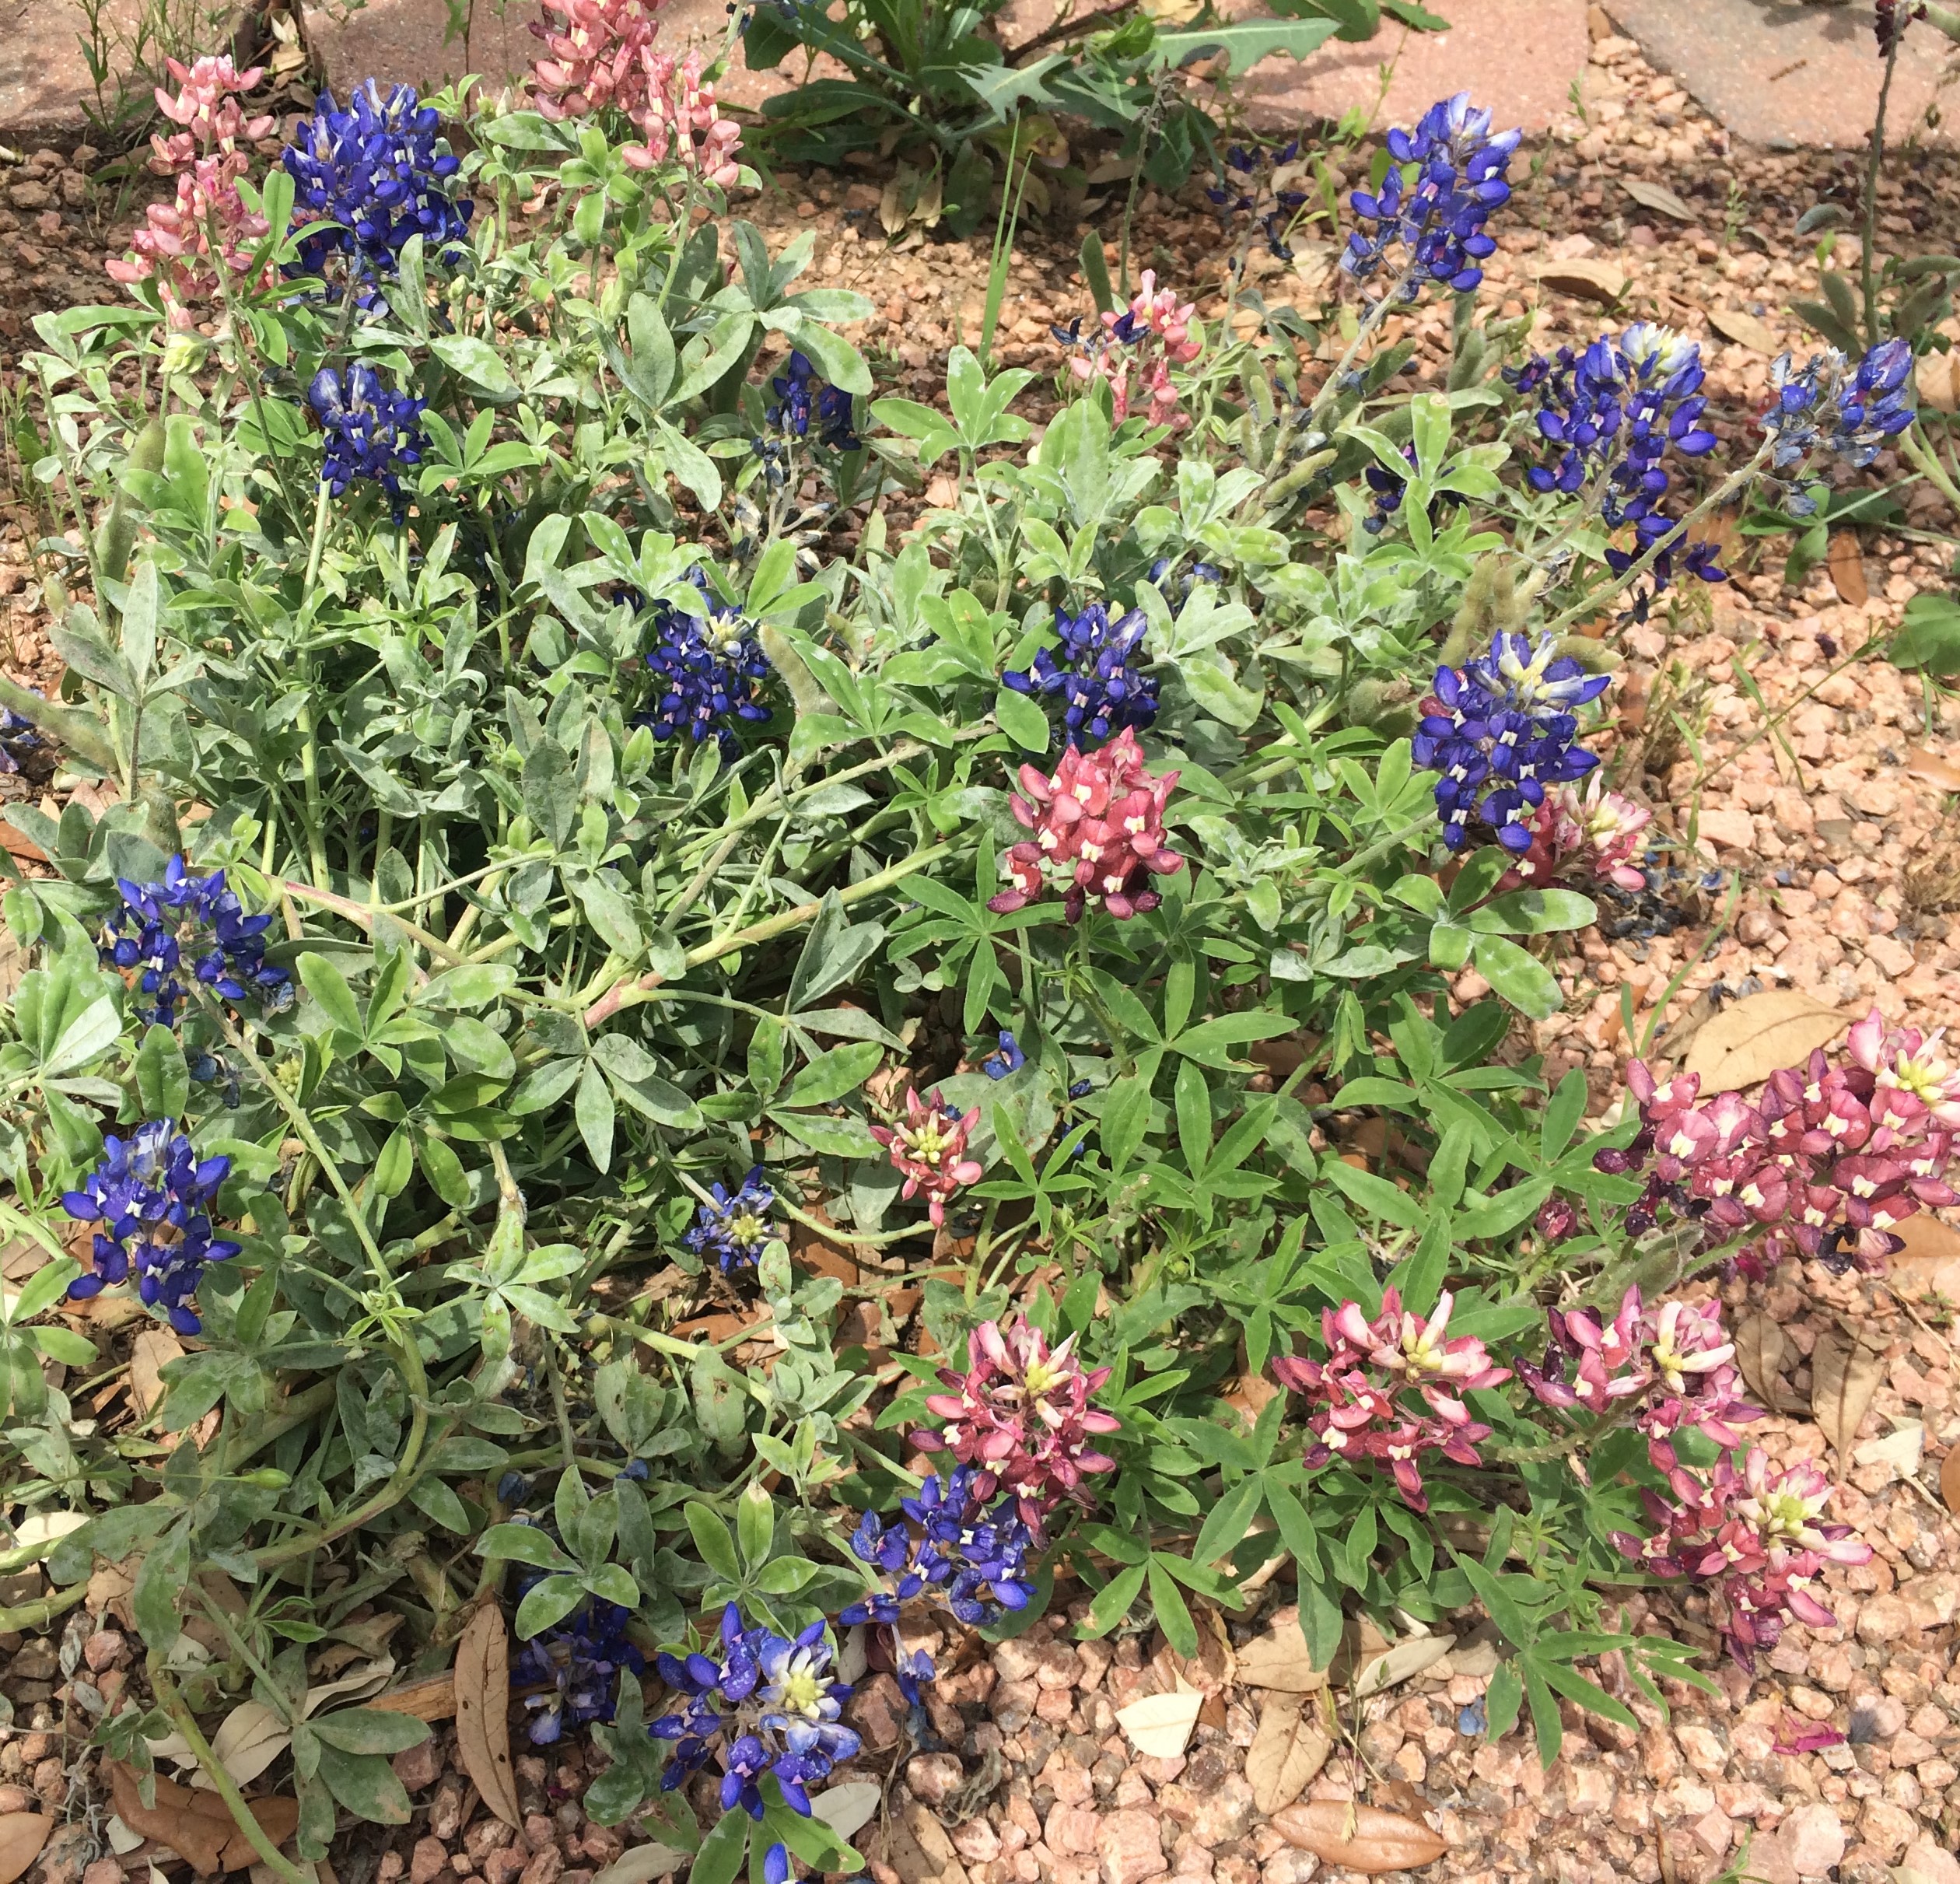 This is our state flower- the Bluebonnet. The most common Bluebonnet that we see is the blue one but there also red and white ones.  They had a field of all 3 but my picture is blurry.